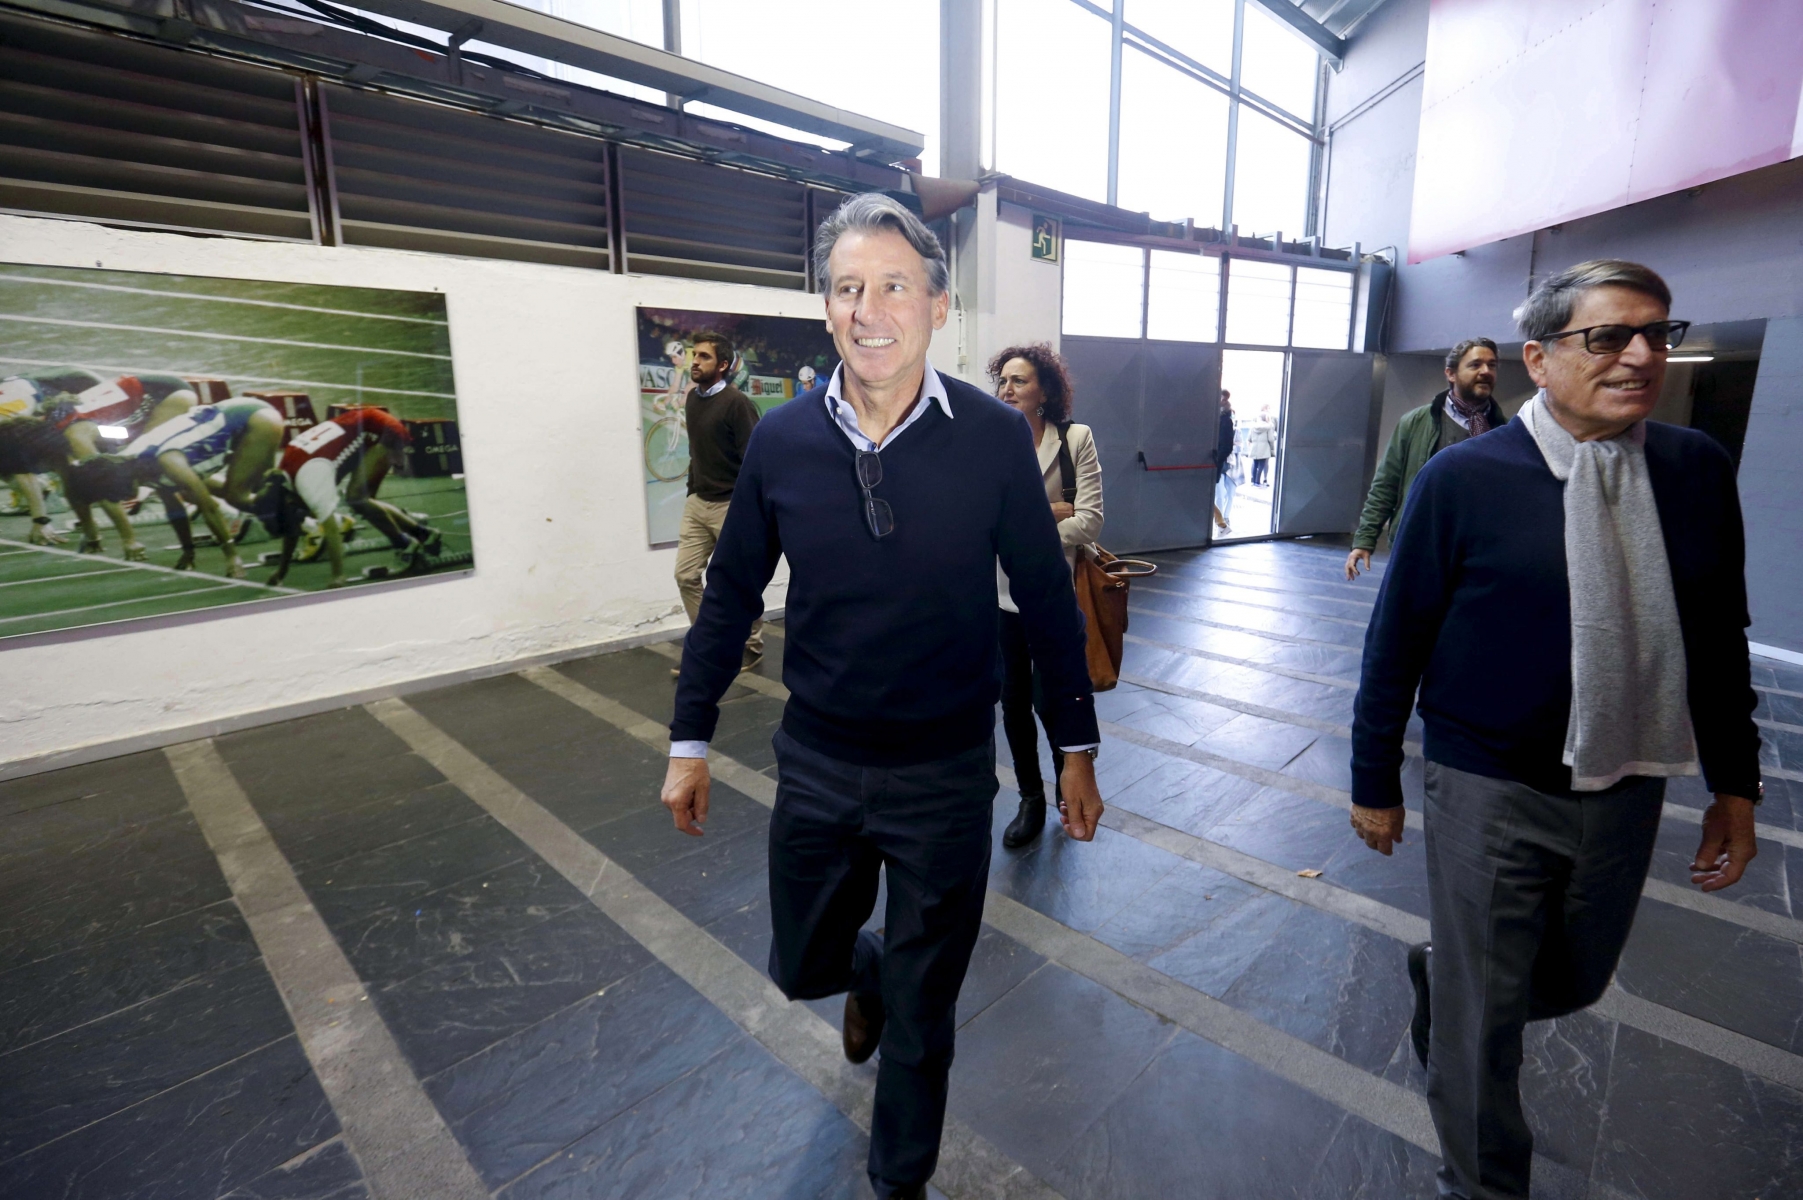 epa05665812 IAAF President Sebastian Coe (C) attends a ceremony marking the first century of the Guipuzkoa Athletics Federation at the Anoeta indoor arena in San Sebastian, northern Spain, 08 December 2016. The Guipuzkoa Athletics Federation paid homage to Coe in the same arena where he won his first international gold medal about fourty years ago.  EPA/JUAN HERREROathlé SPAIN ATHLETICS IAAF